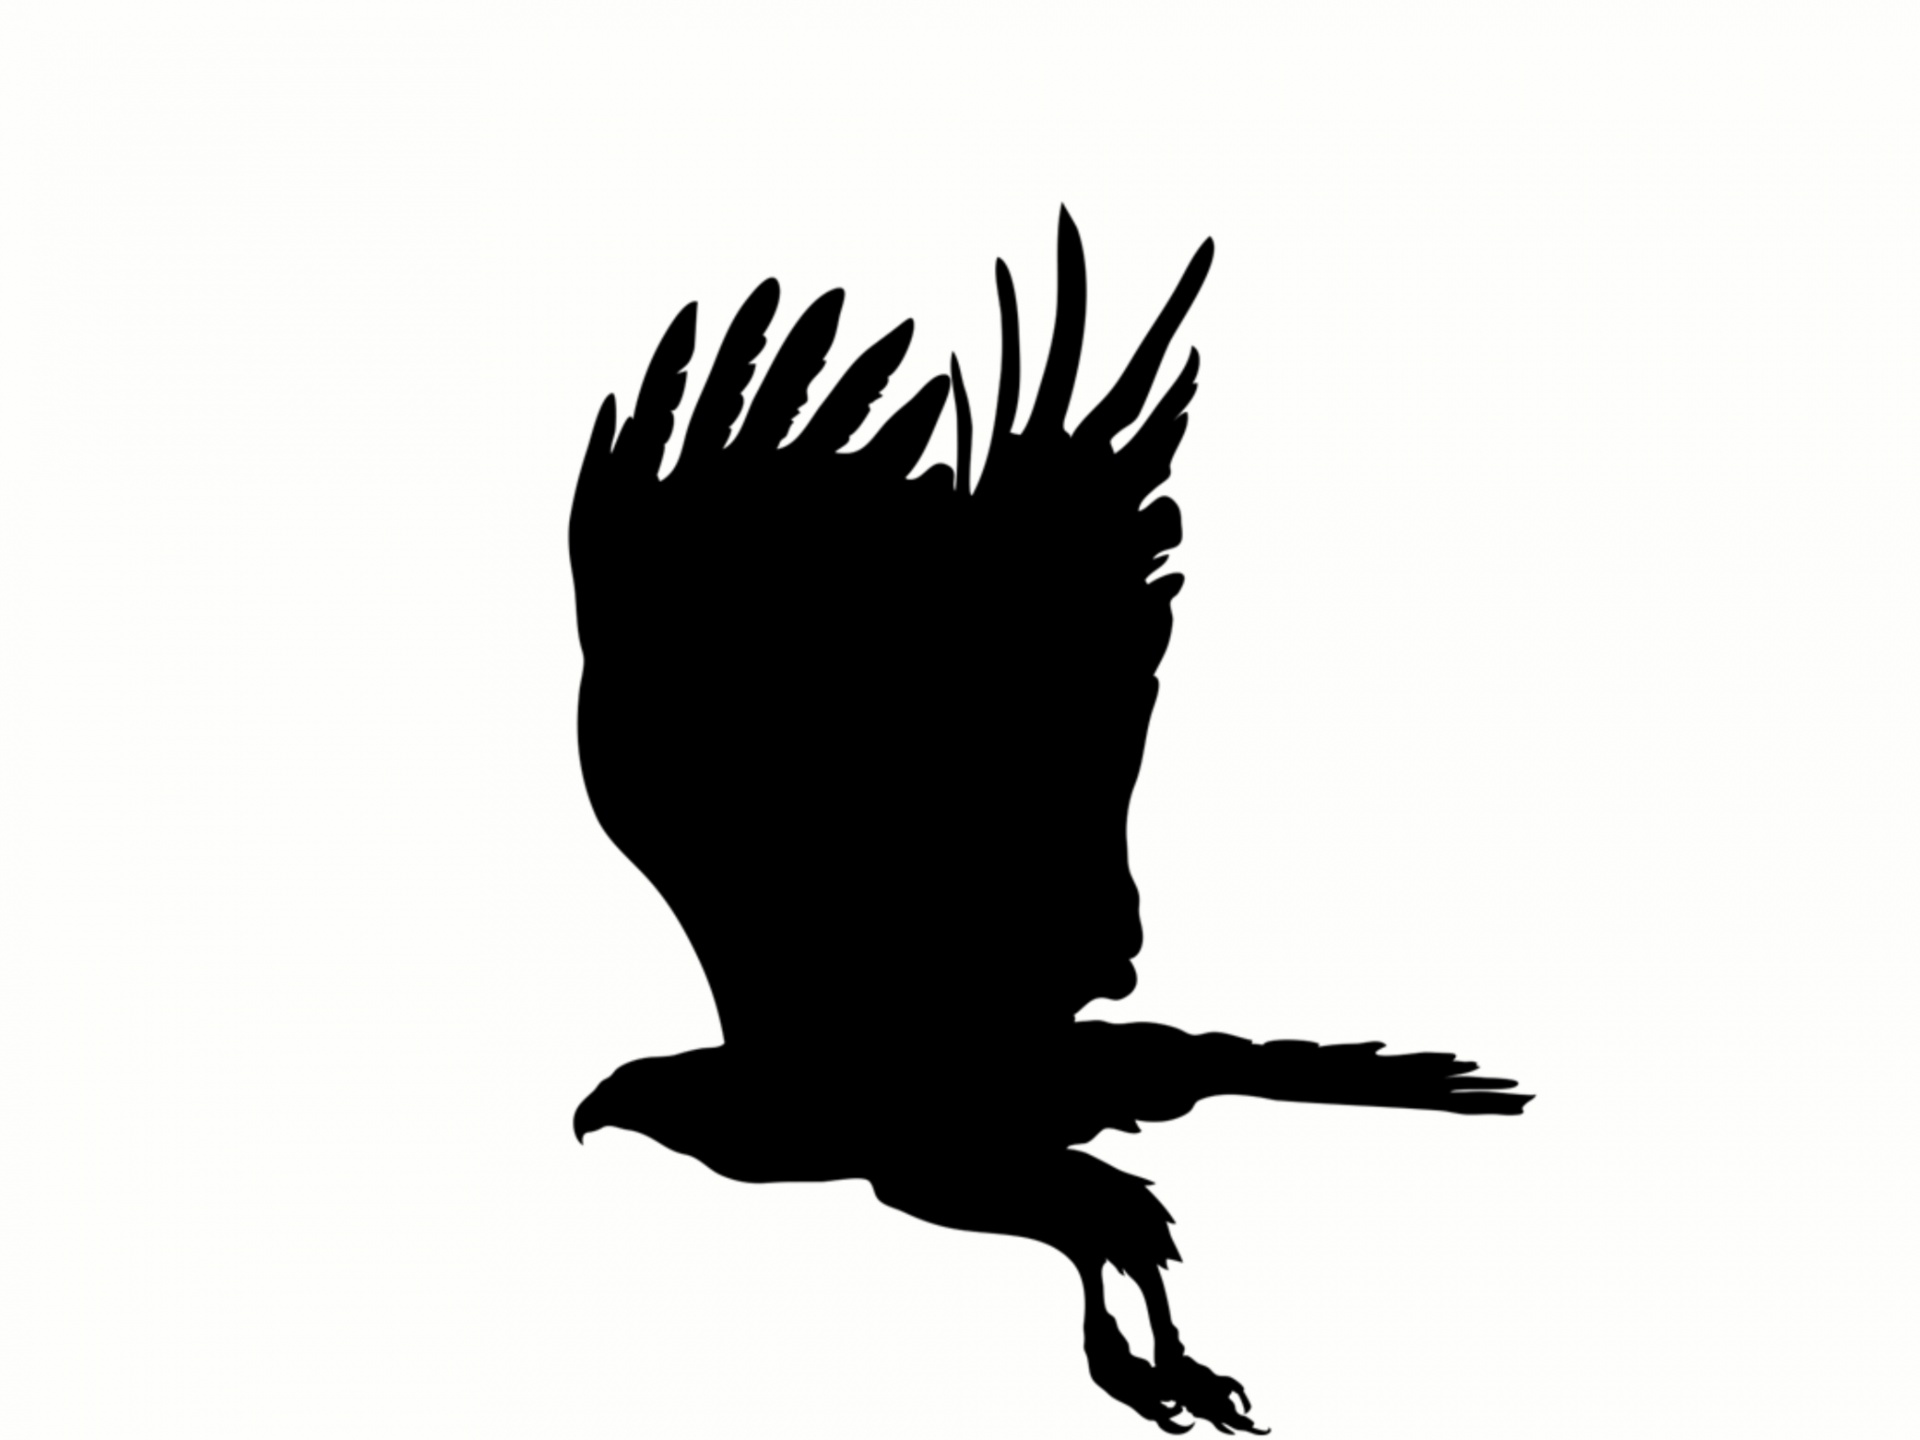 flying eagle black silhouette on white background